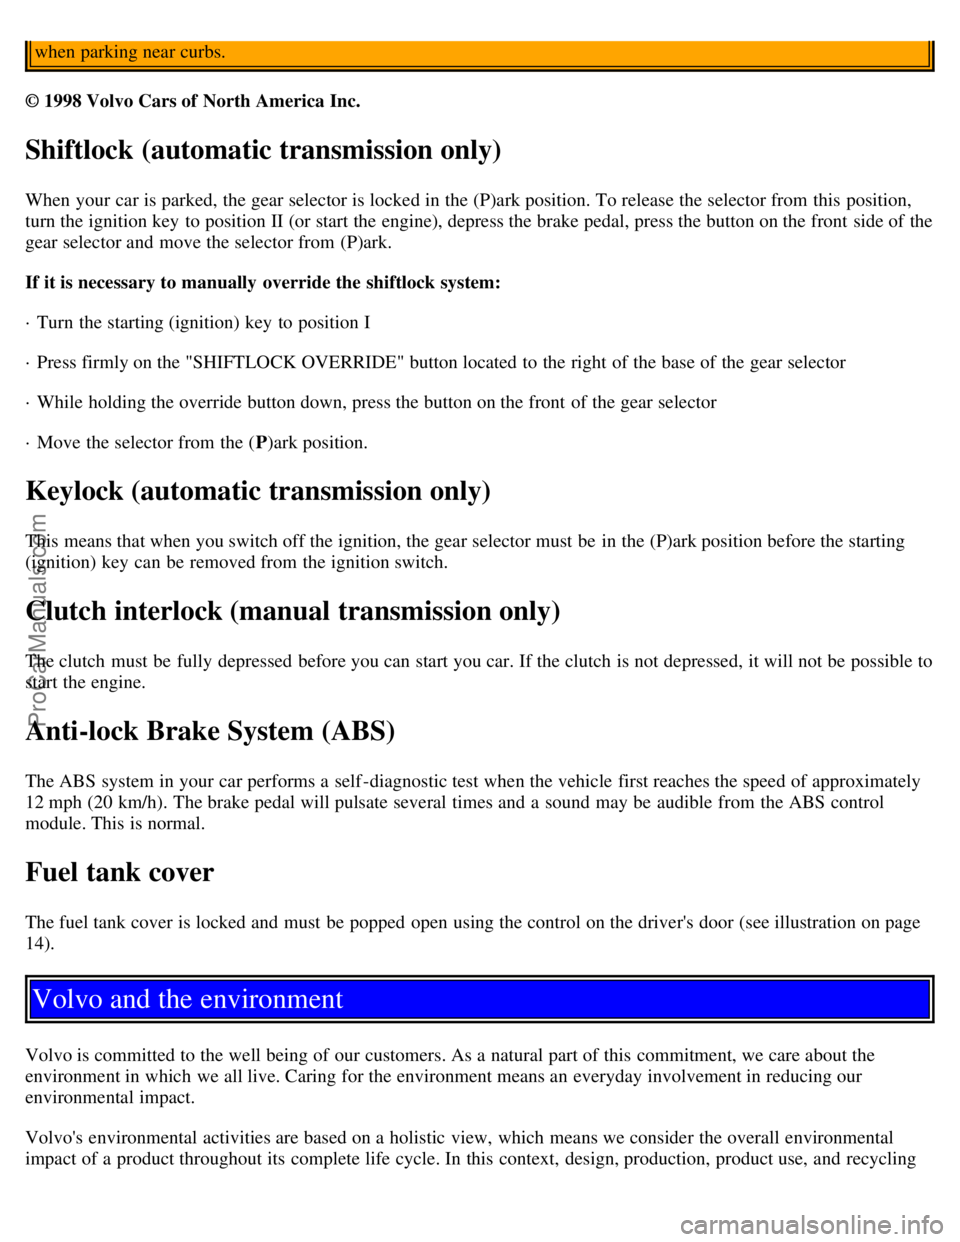 VOLVO C70 2000  Owners Manual when parking near curbs.
© 1998 Volvo Cars of North America Inc. 
Shiftlock (automatic transmission only)
When your car is parked, the gear selector is locked in the (P)ark position. To release the s